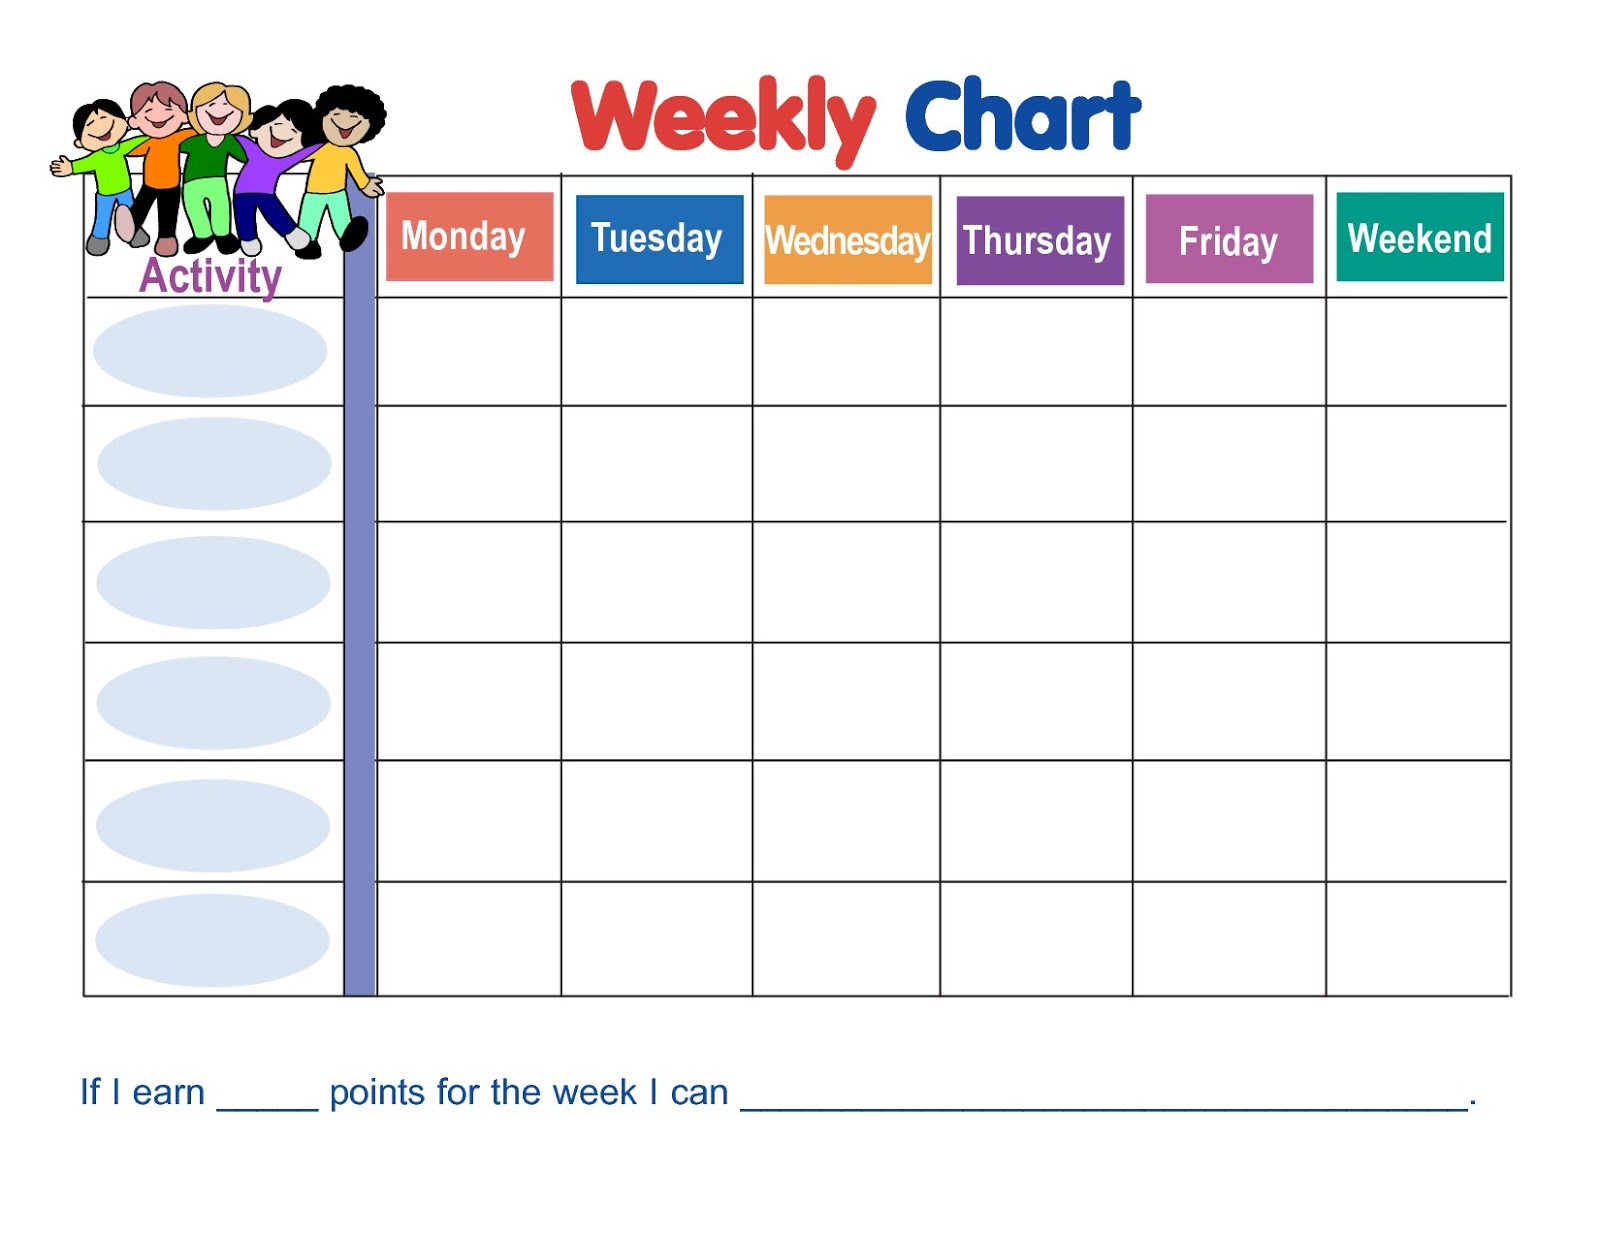 behavior-chart-for-students-to-decorate-their-class-room